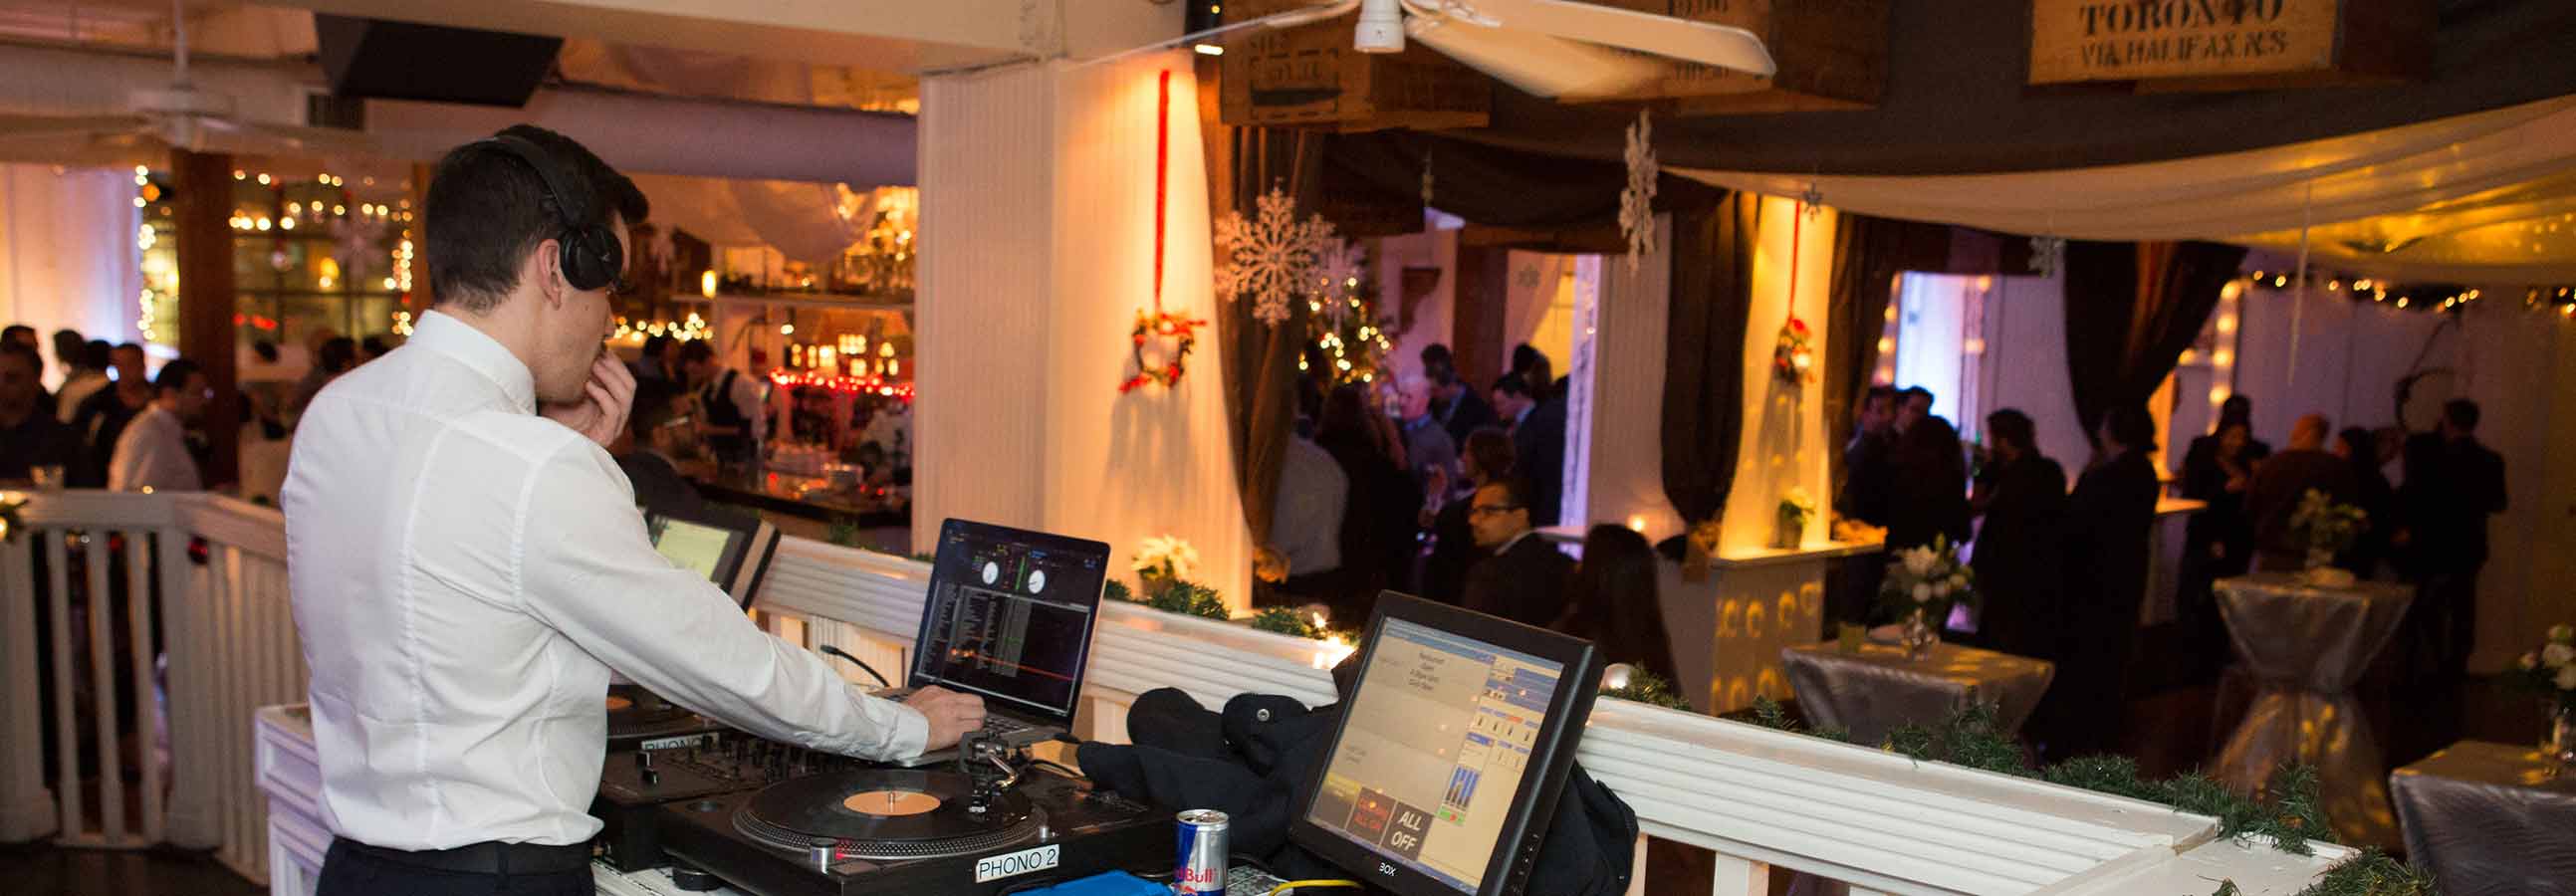 Toronto Event Venues - Holiday Party - Urban Loft with DJ Booth